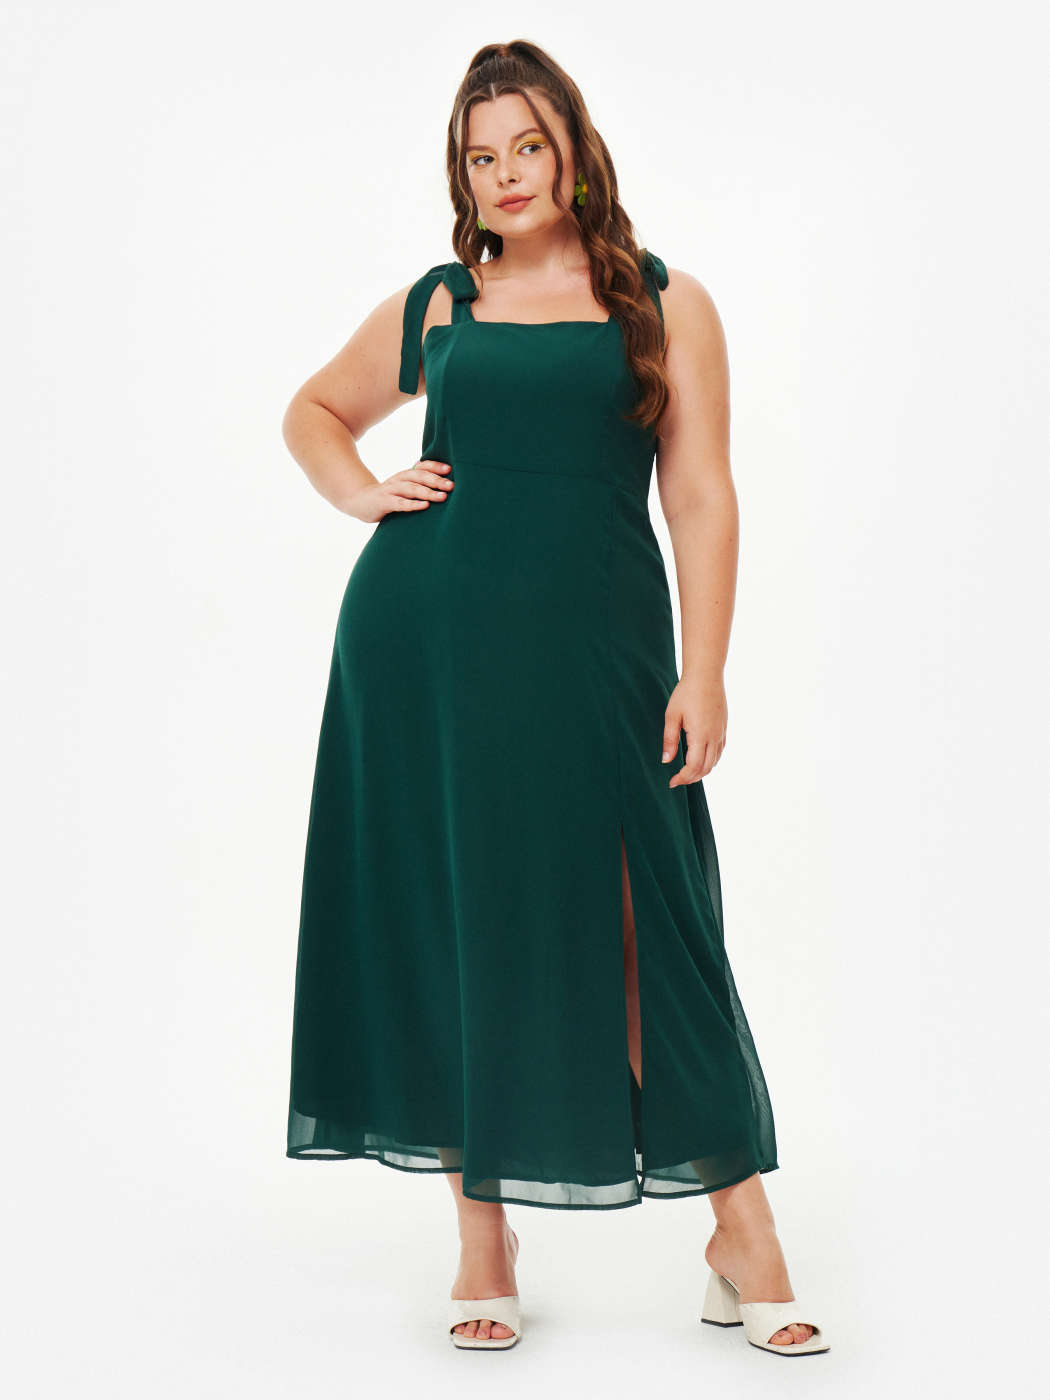 A woman in a plus size Slit Cider Dress